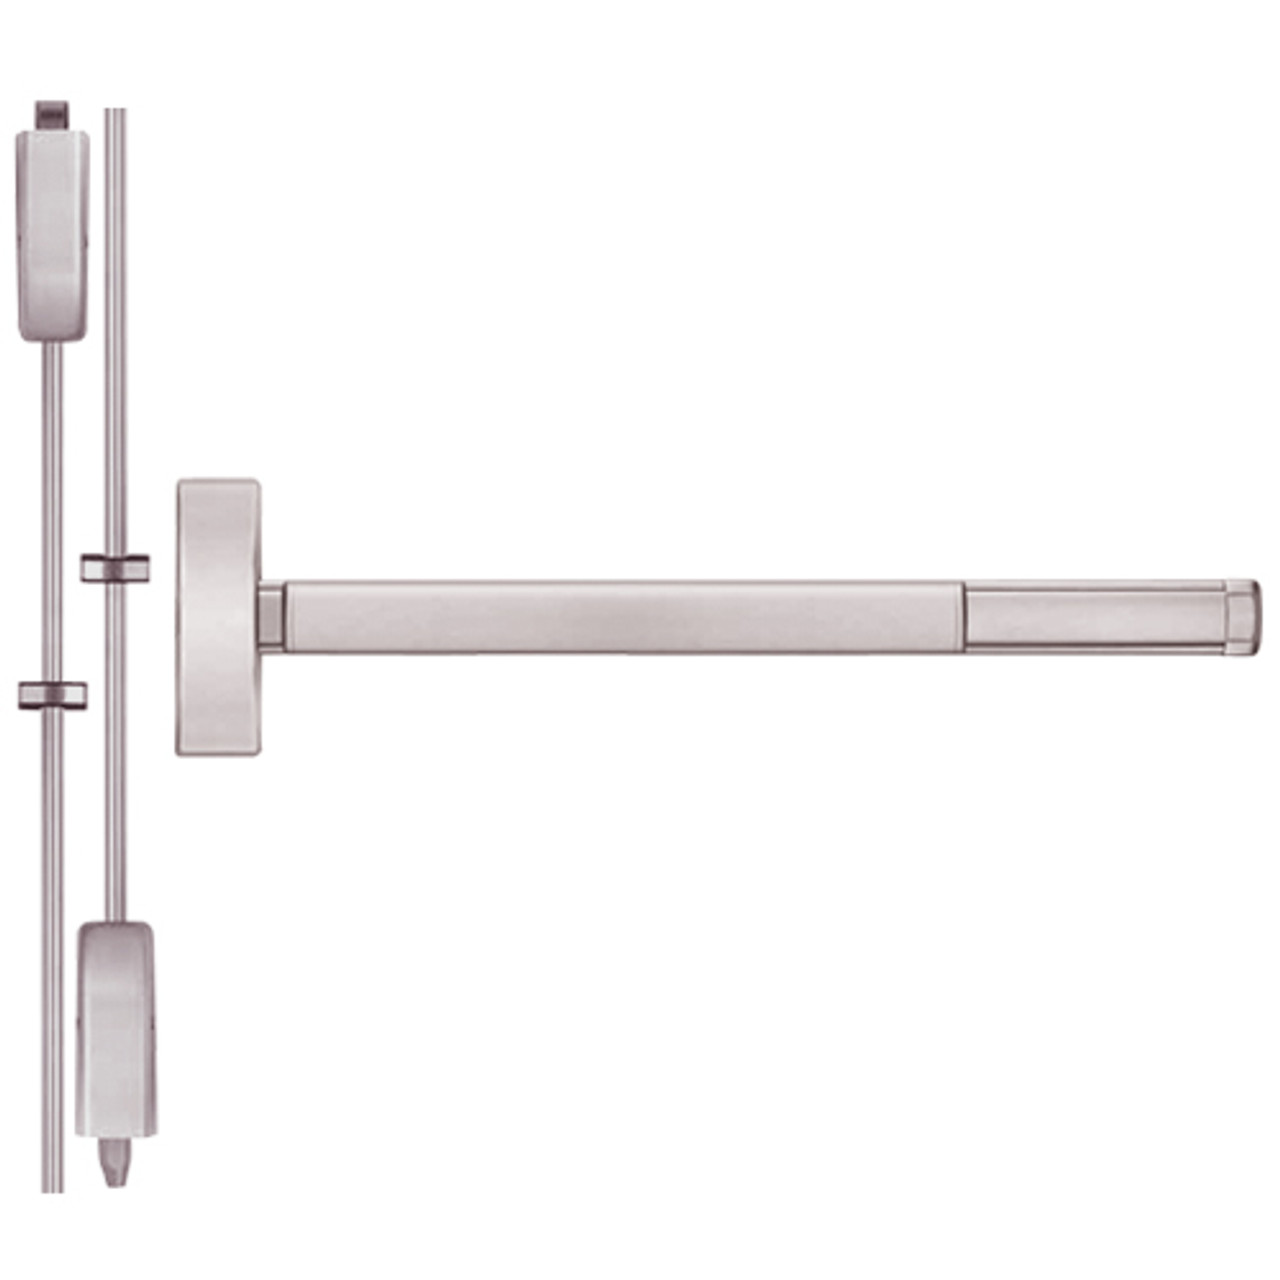 DEFL2203-628-36 PHI 2200 Series Fire Rated Apex Surface Vertical Rod Device with Delayed Egress Prepped for Key Retracts Latchbolt in Satin Aluminum Finish